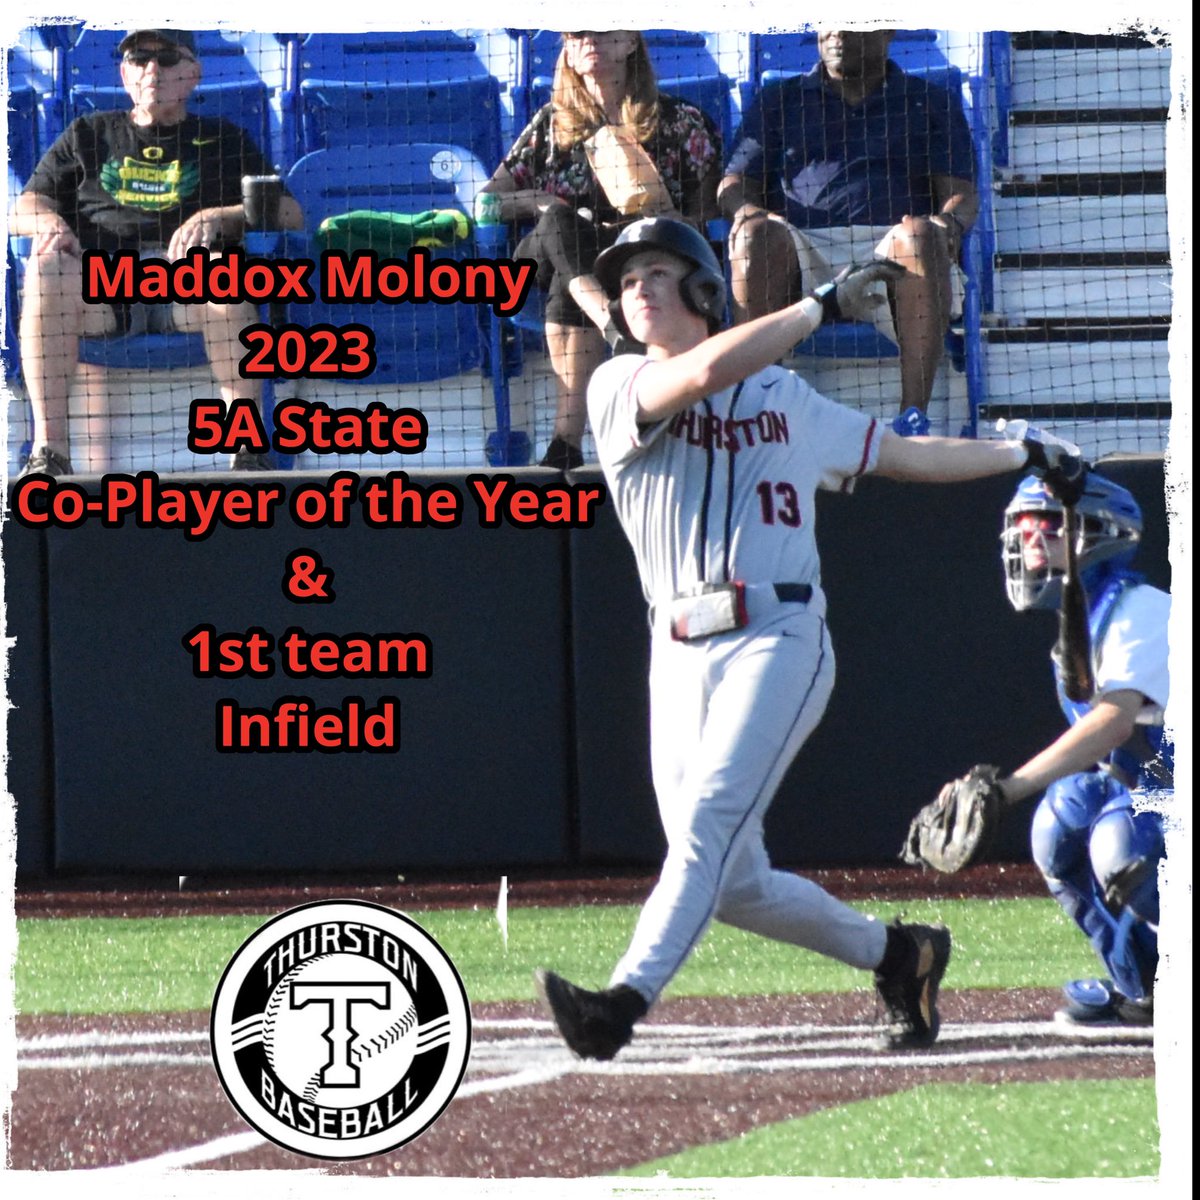 Congratulations to @maddox_molony for Back to back all state Player of the year and 1st team Infield @PBR_Oregon @BaseballNW @CoachWazUO